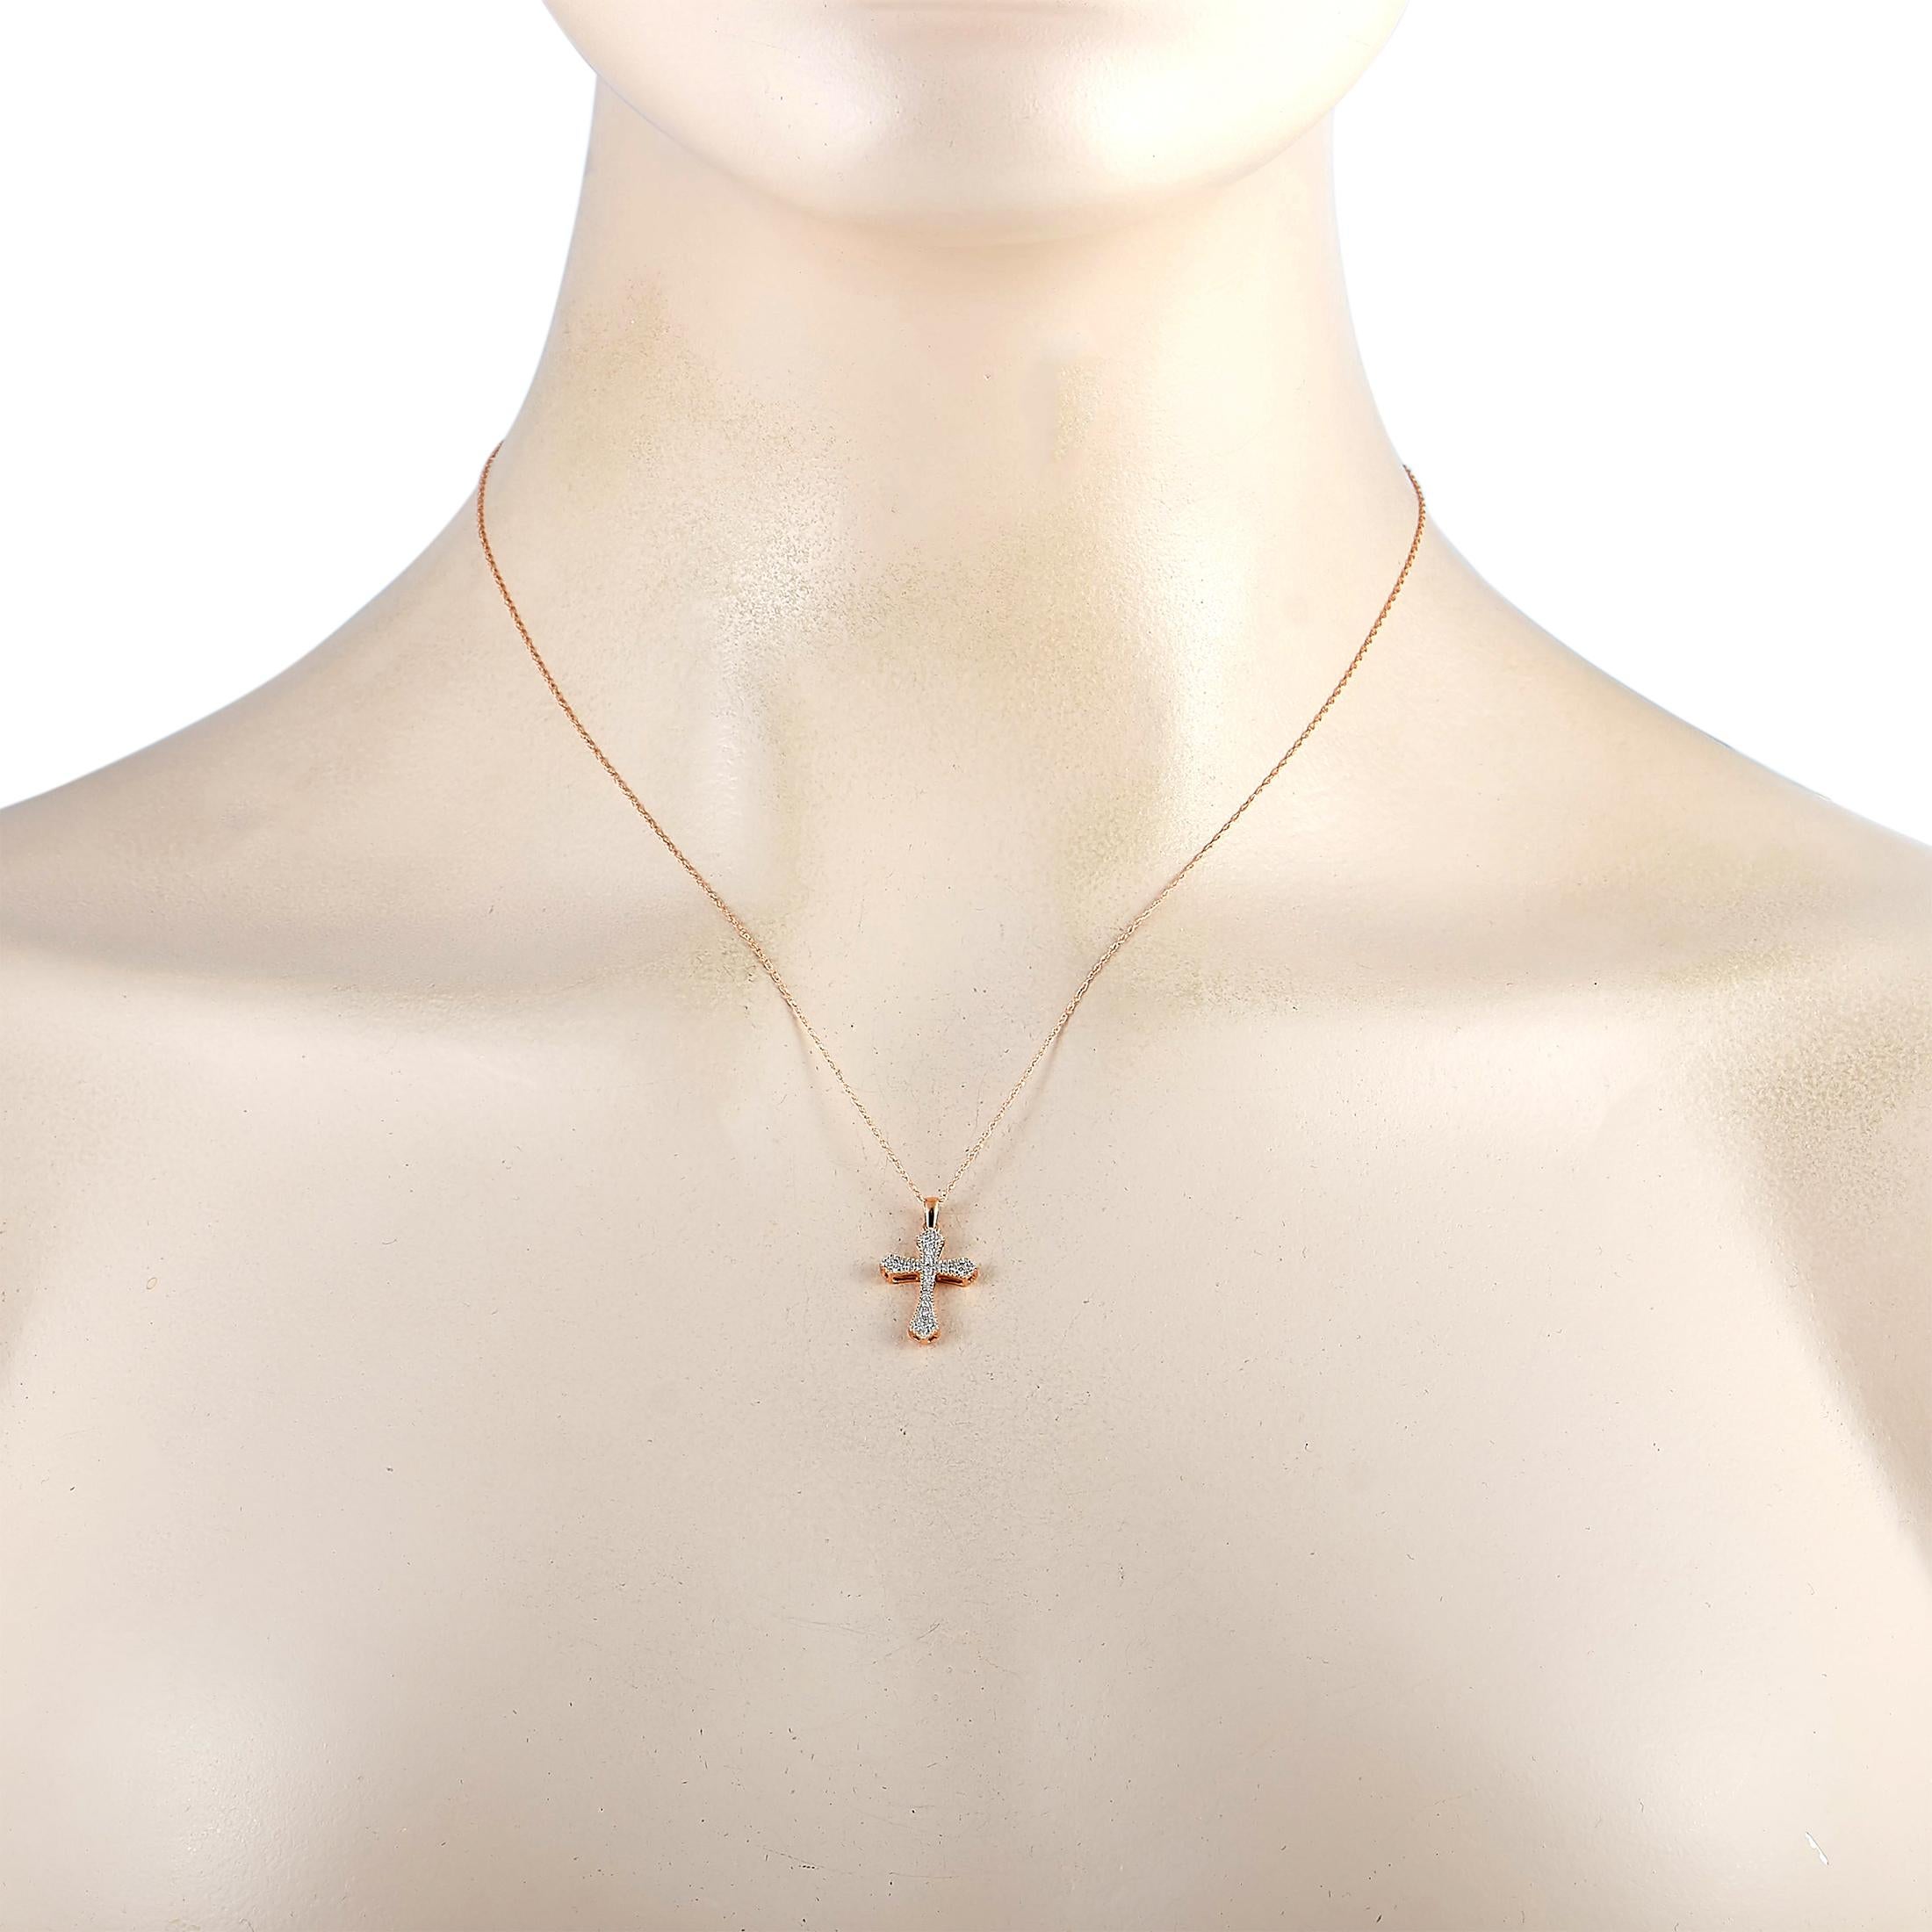 This LB Exclusive necklace is crafted from 14K rose gold and weighs 1.2 grams. It is presented with an 18” chain and a cross pendant that measures 0.87” in length and 0.50” in width. The necklace is embellished with diamonds that total 0.10